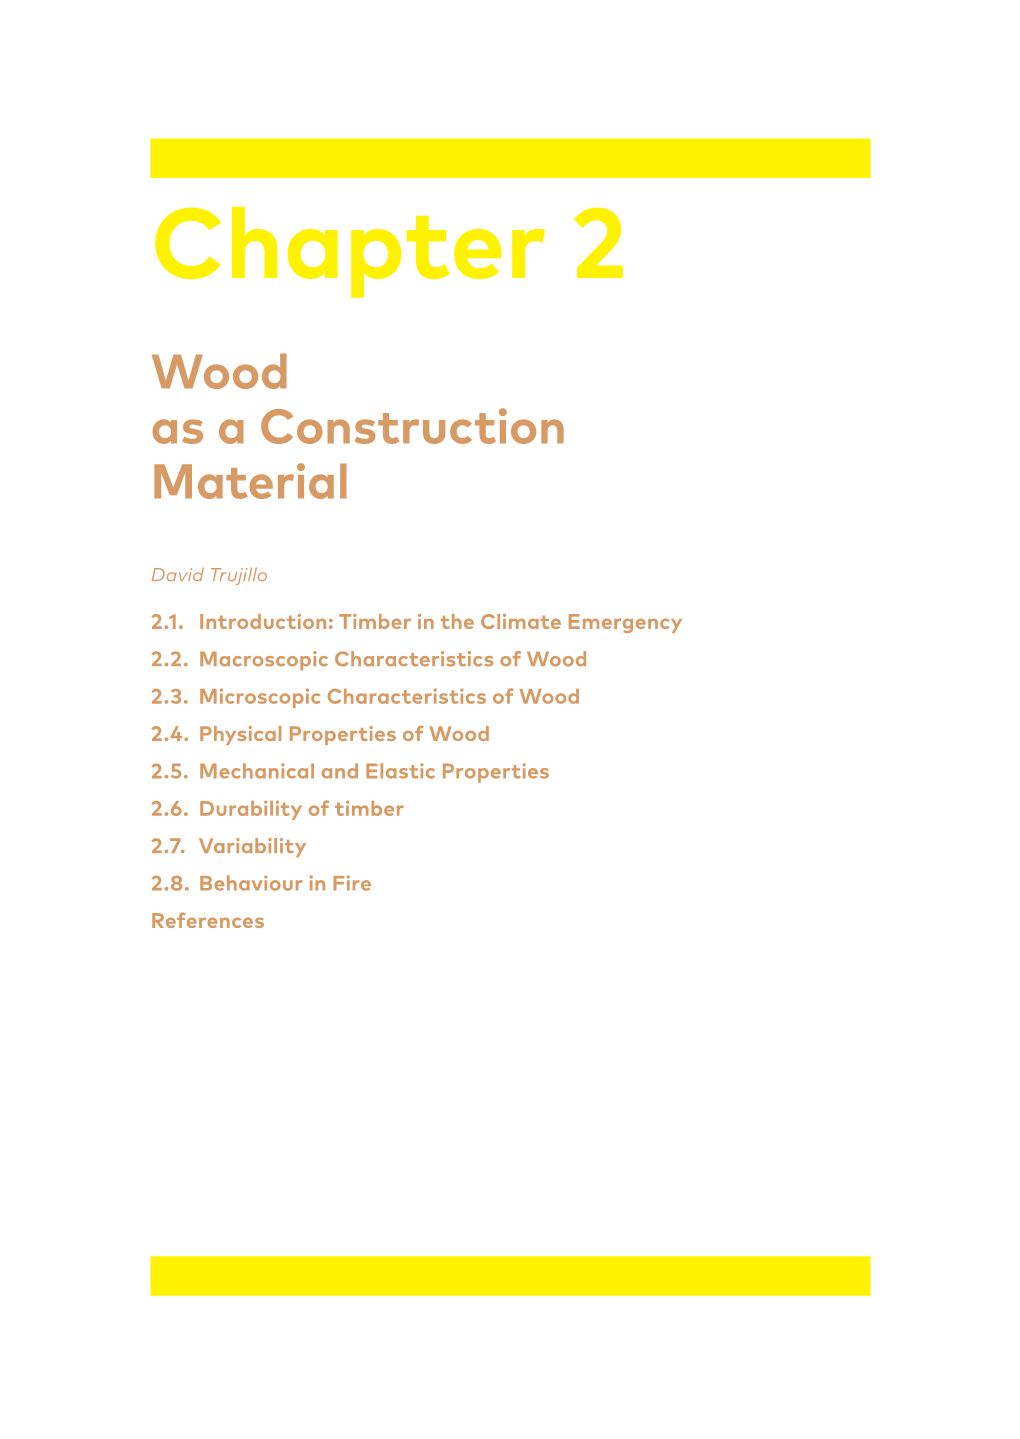 Chapter 2 Wood As a Construction Material